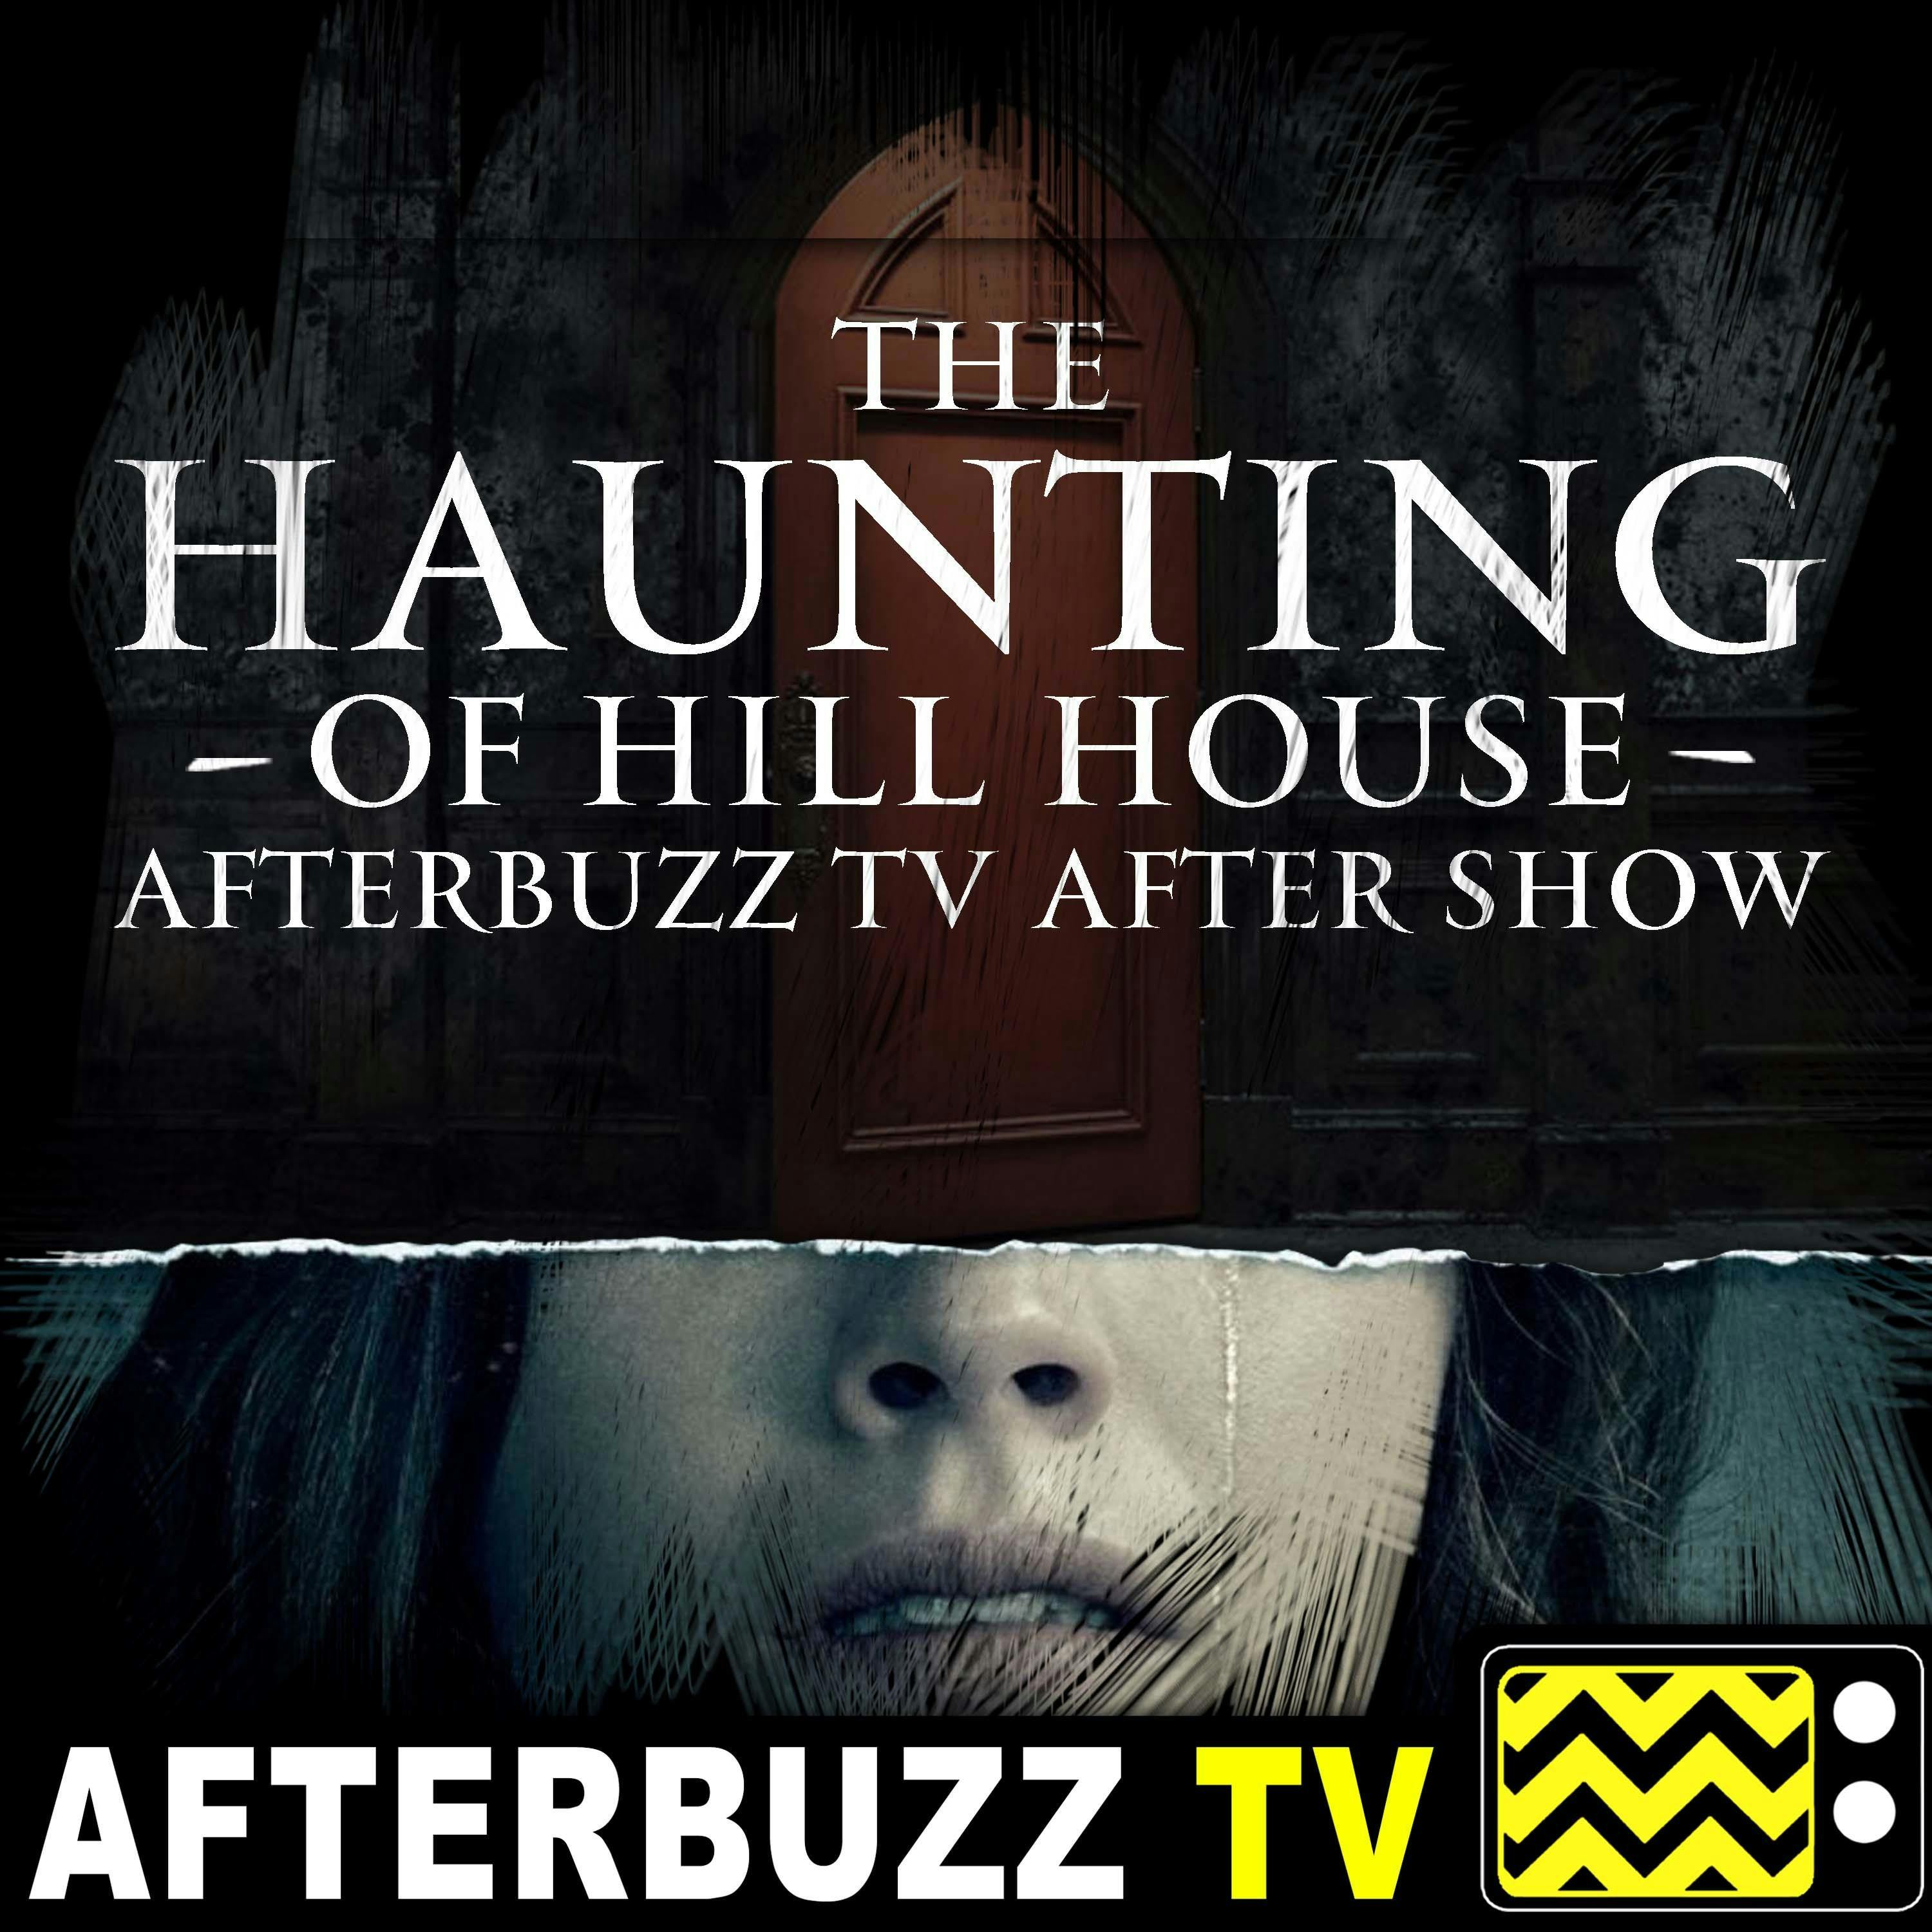 The Haunting of Hill House Season 1 Review Part 3: The Viewing *Spoilers*